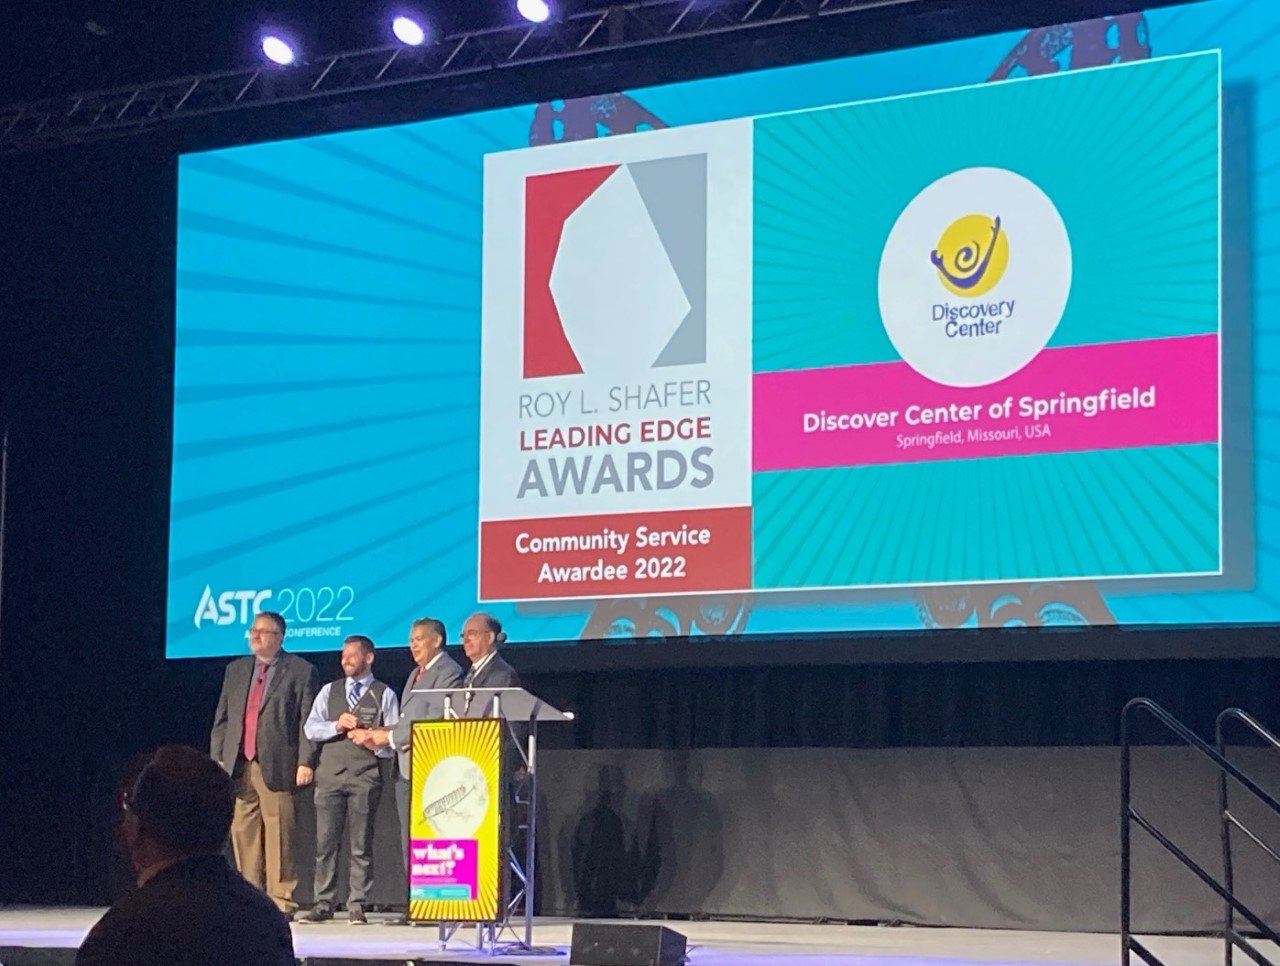 Discovery Center officials accept the award during the ASTC conference in Pittsburgh.